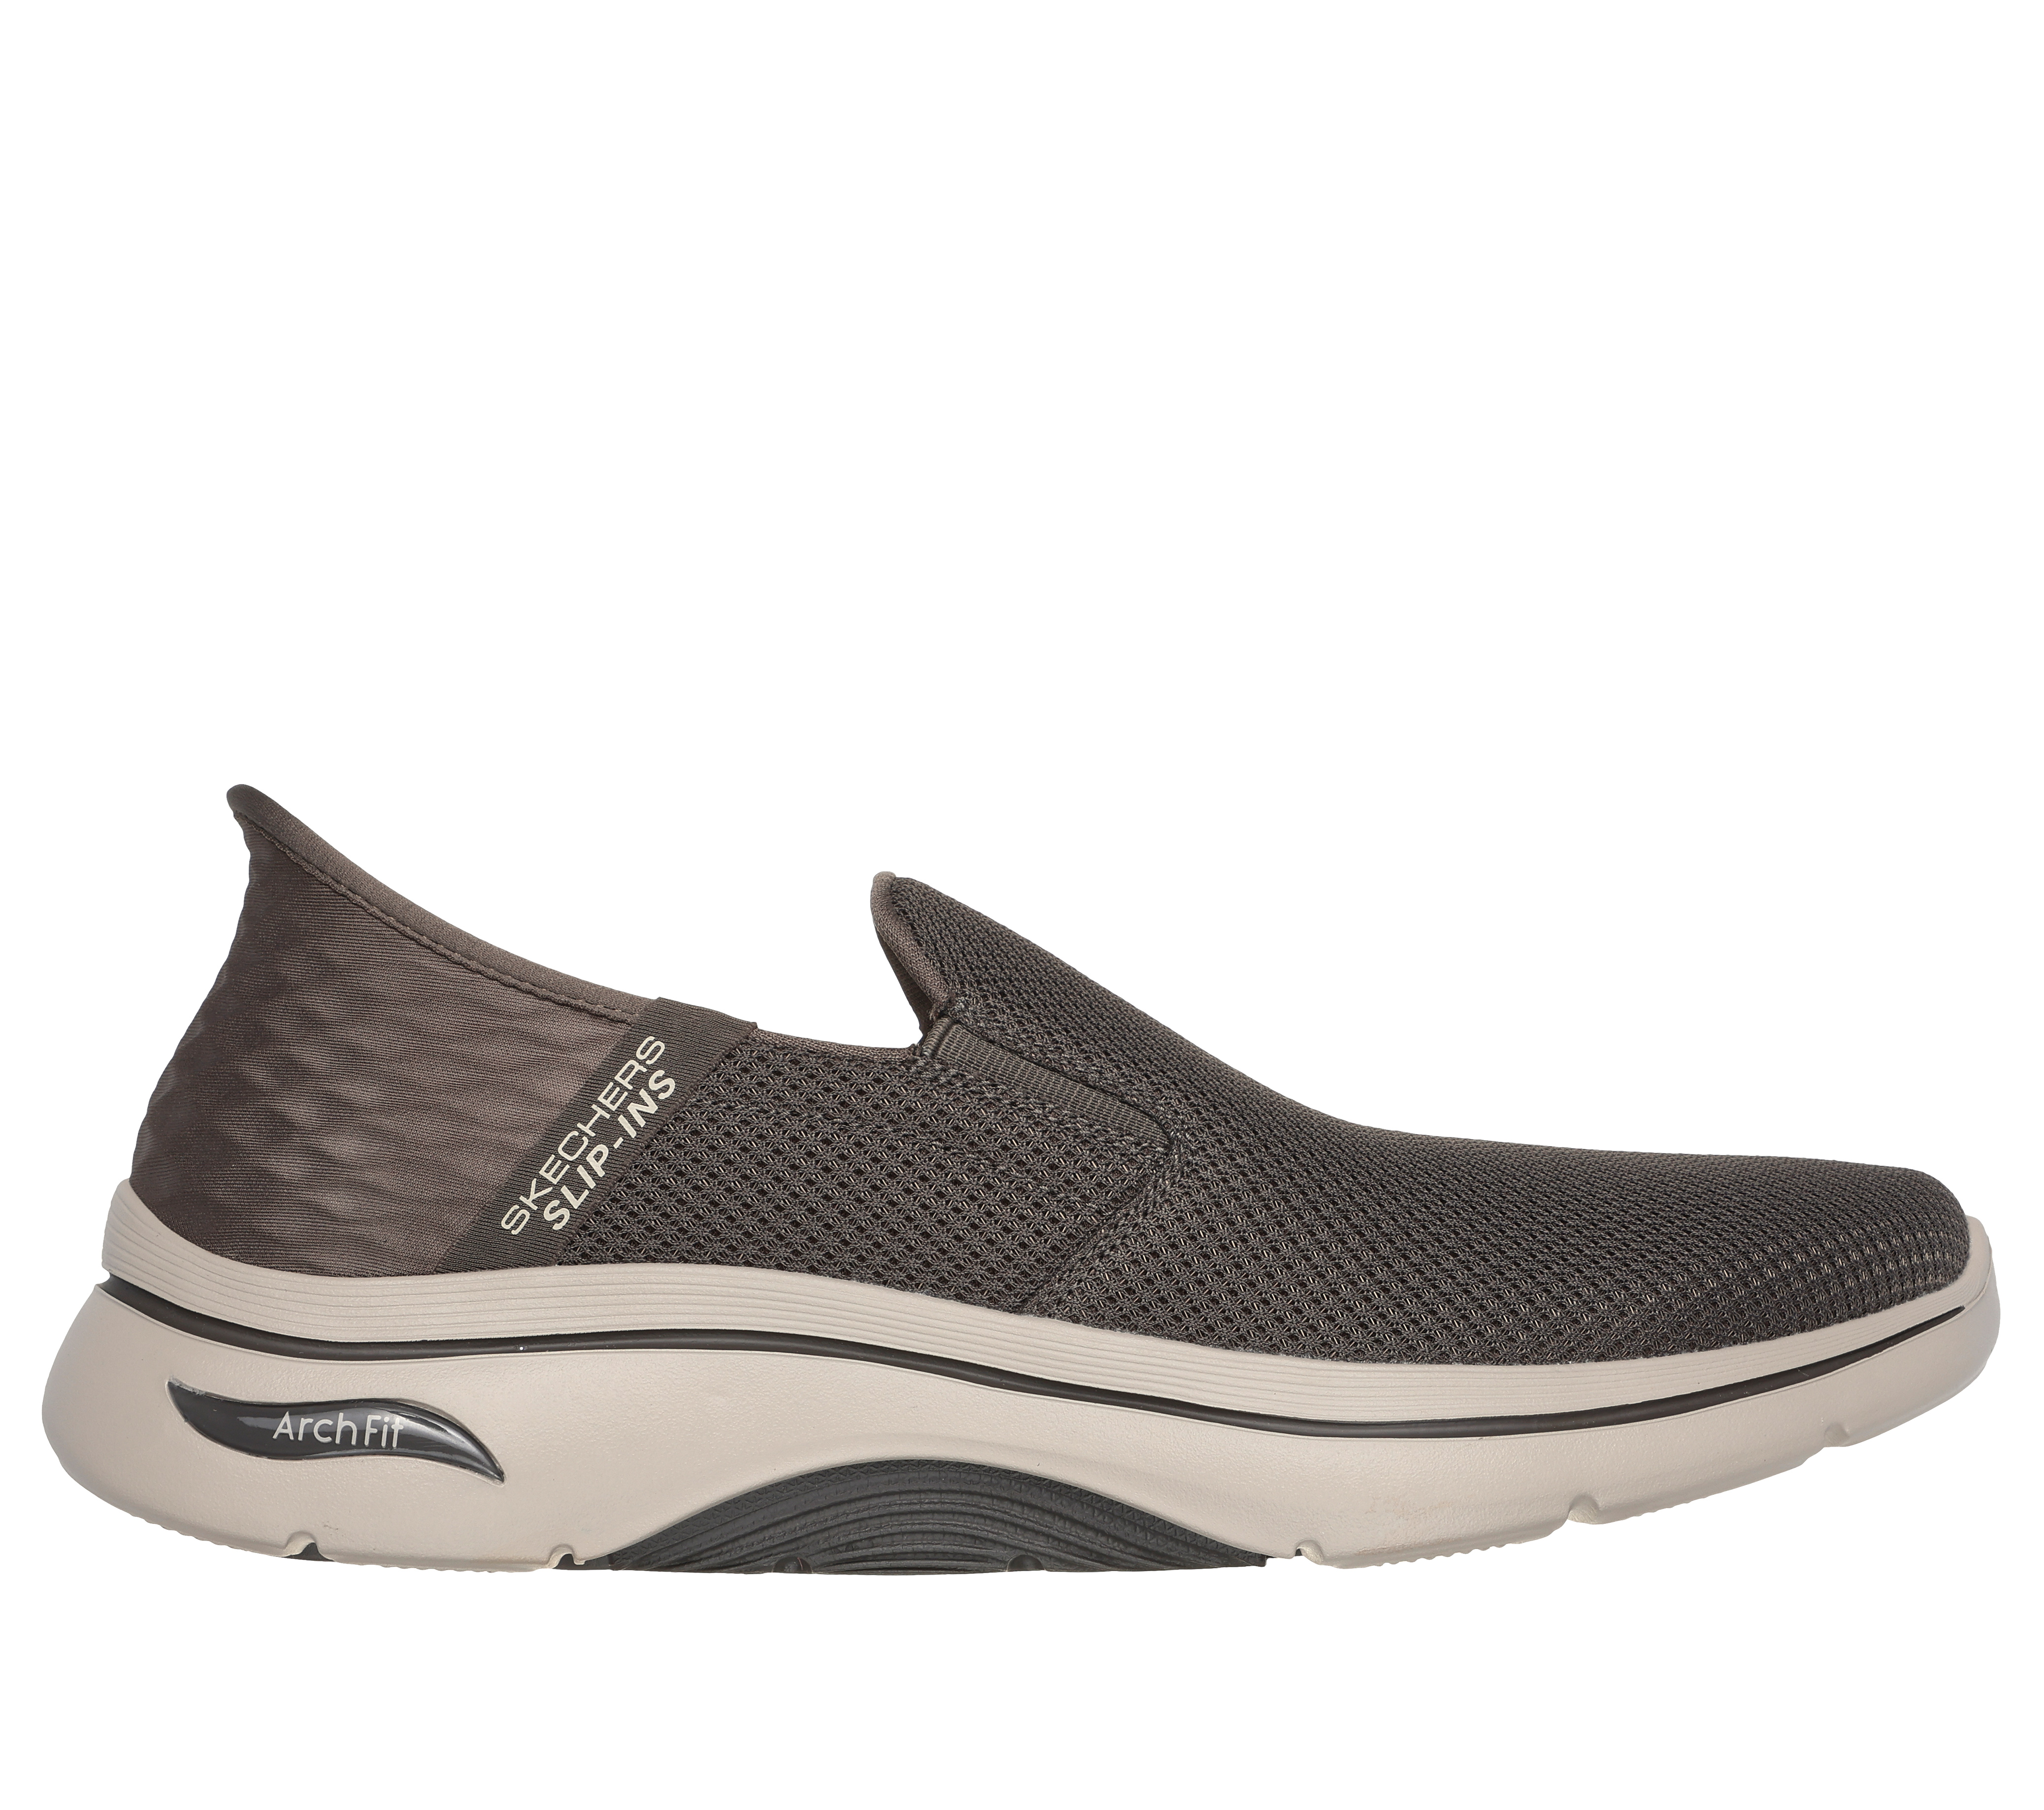 Skechers GOwalk Classic Washable Slip-Ons - Crystal View